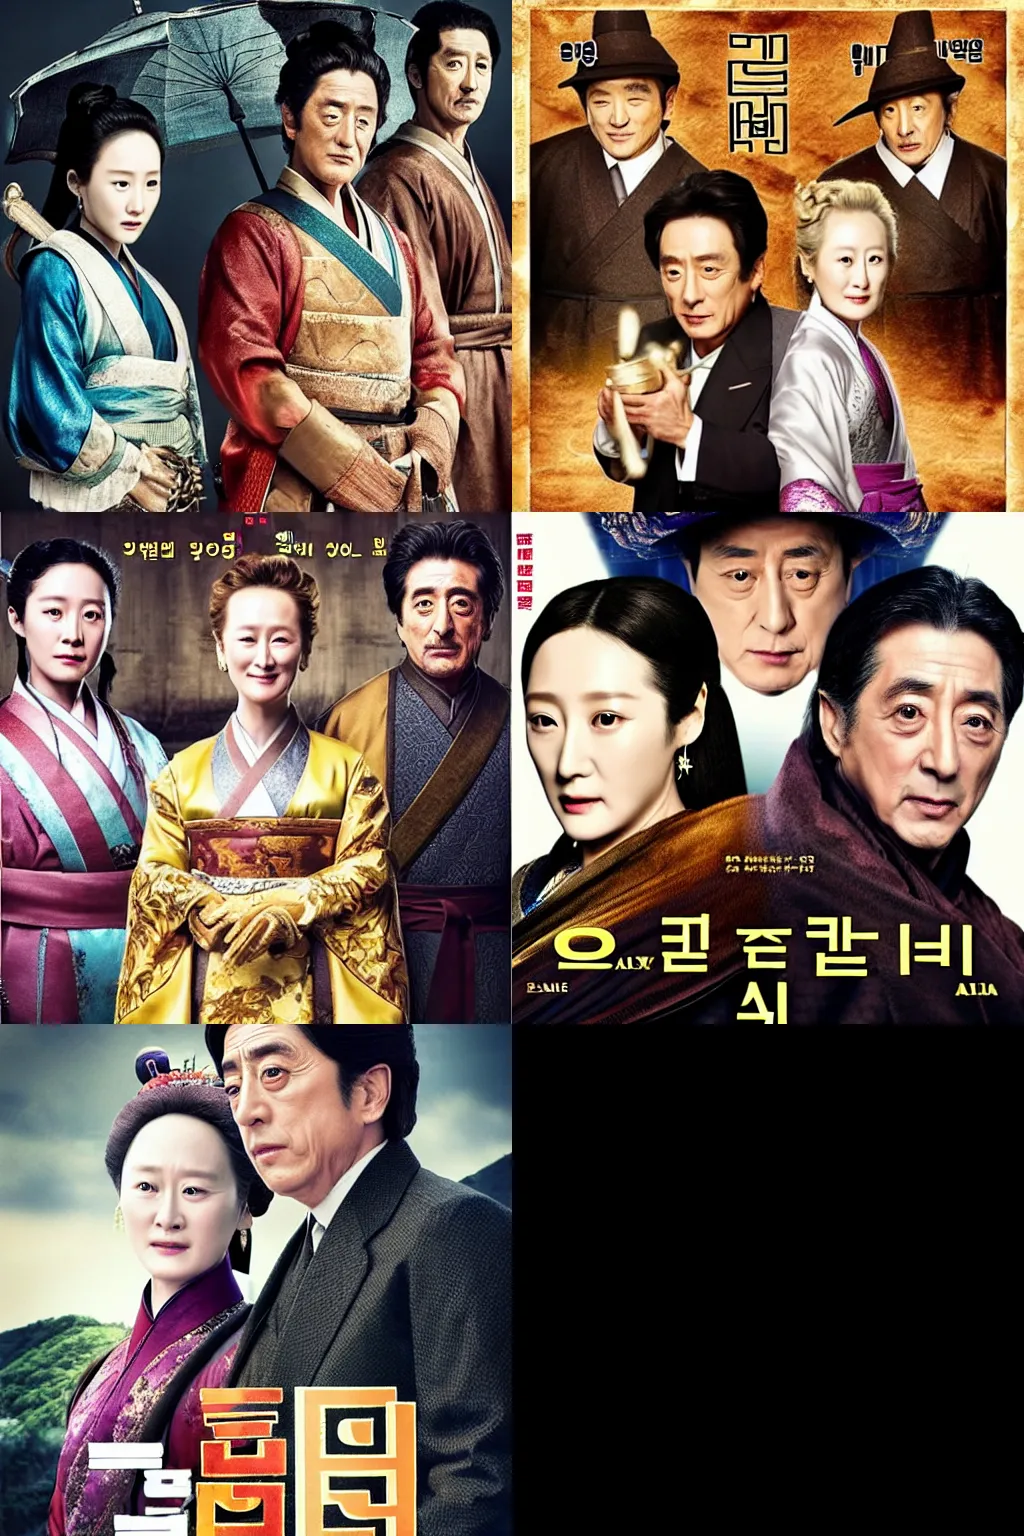 Prompt: korean sageuk tv series, in the leading roles Ziyi Zhang, Meryl Streep and Al Pacino, poster